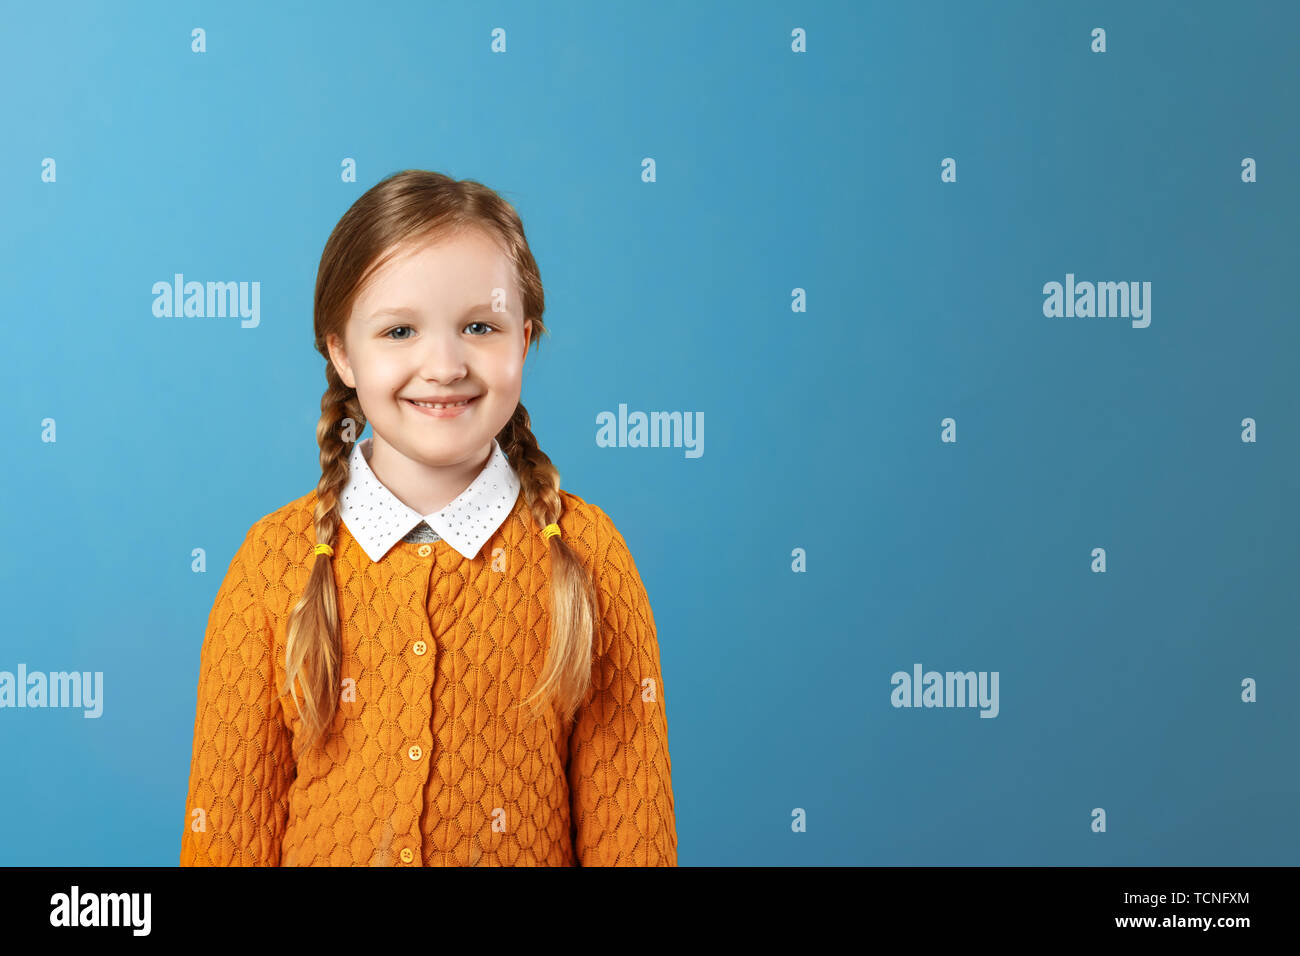 Closeup portrait of a little girl schoolgirl. Pretty child in a yellow sweater on a blue background. Copy space Stock Photo